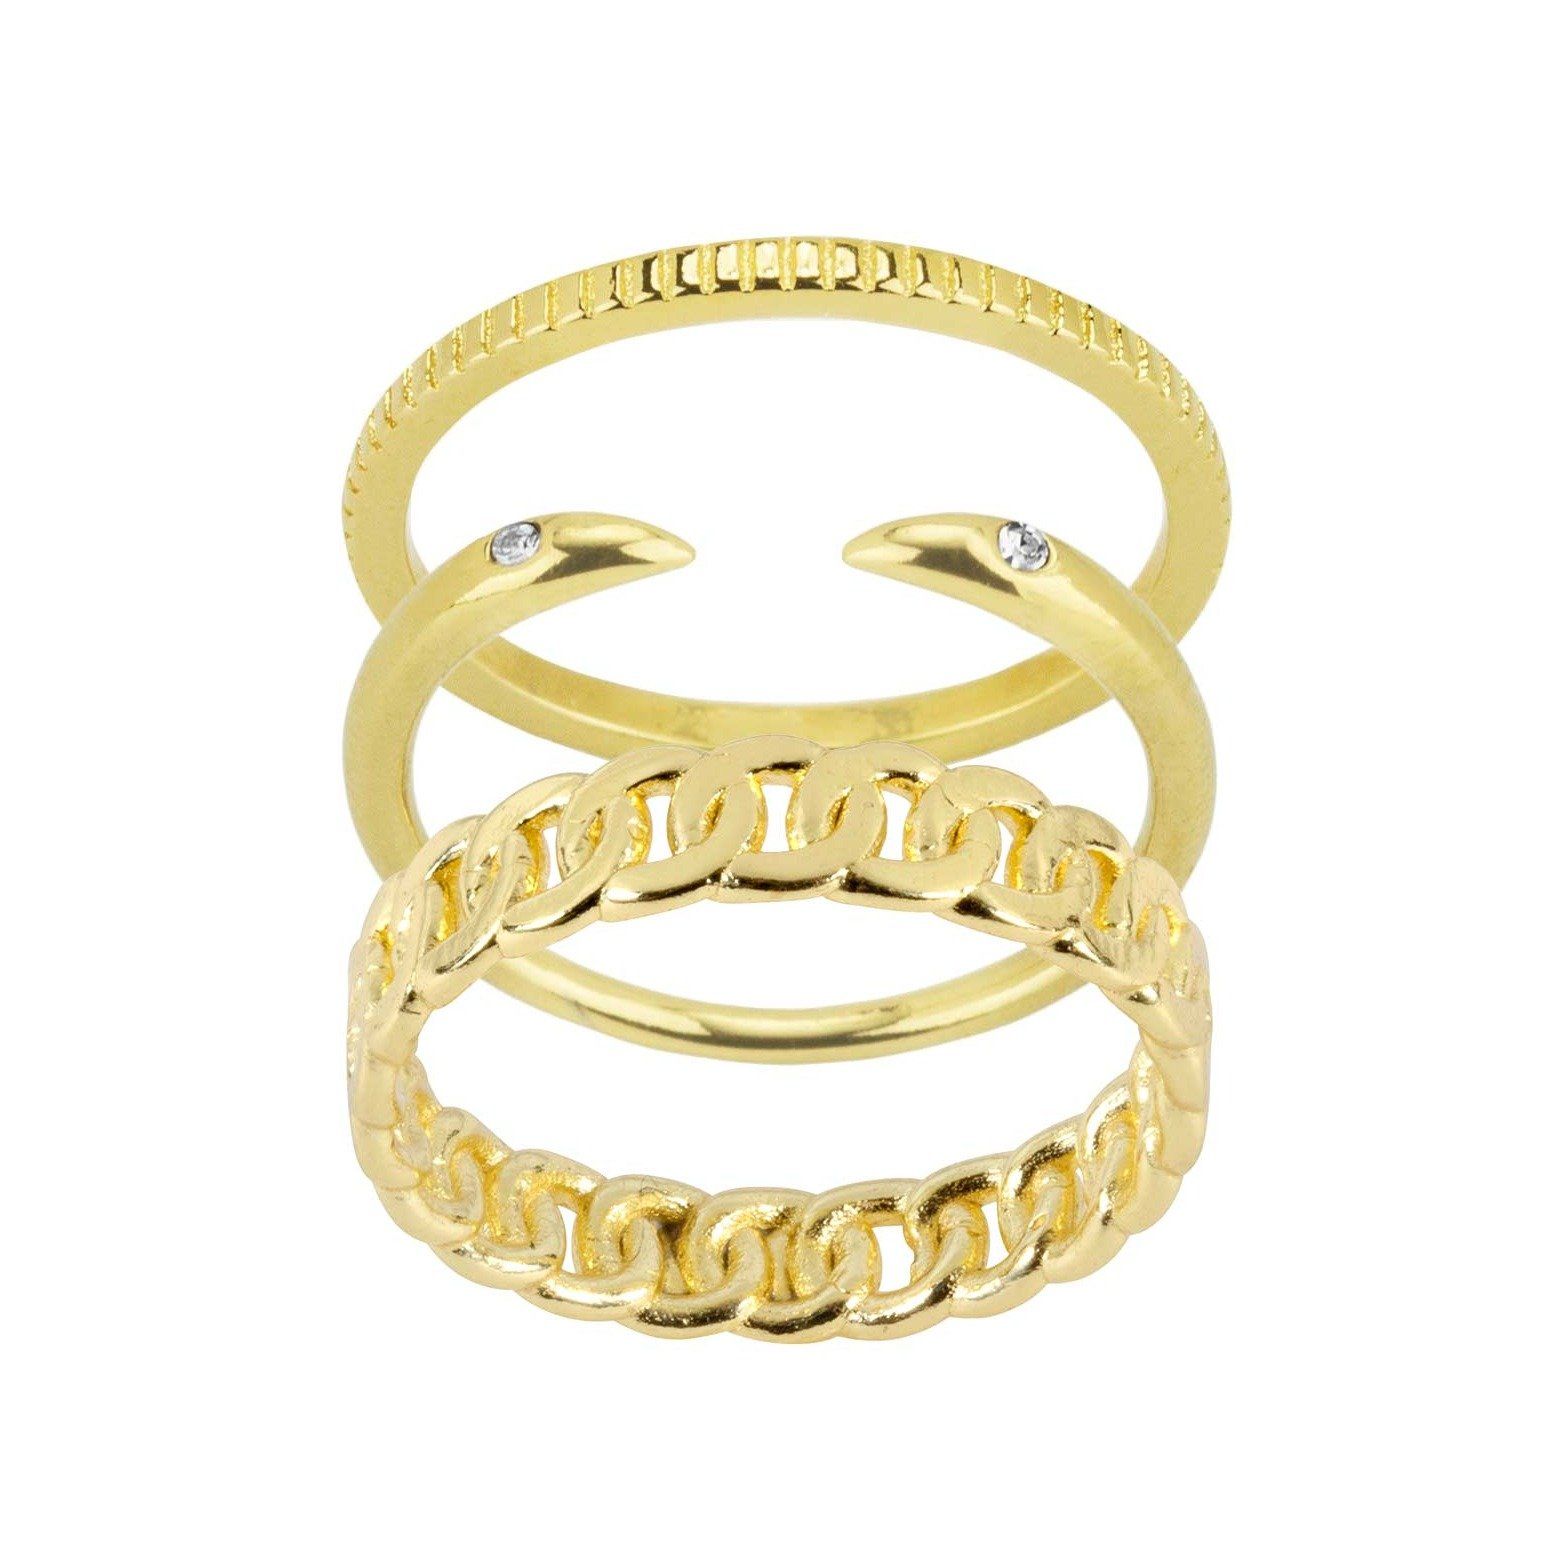 Figaro Ring Stack comes with one coin ring, one claw ring and one figaro chain ring, handmade by Katie Dean Jewelry